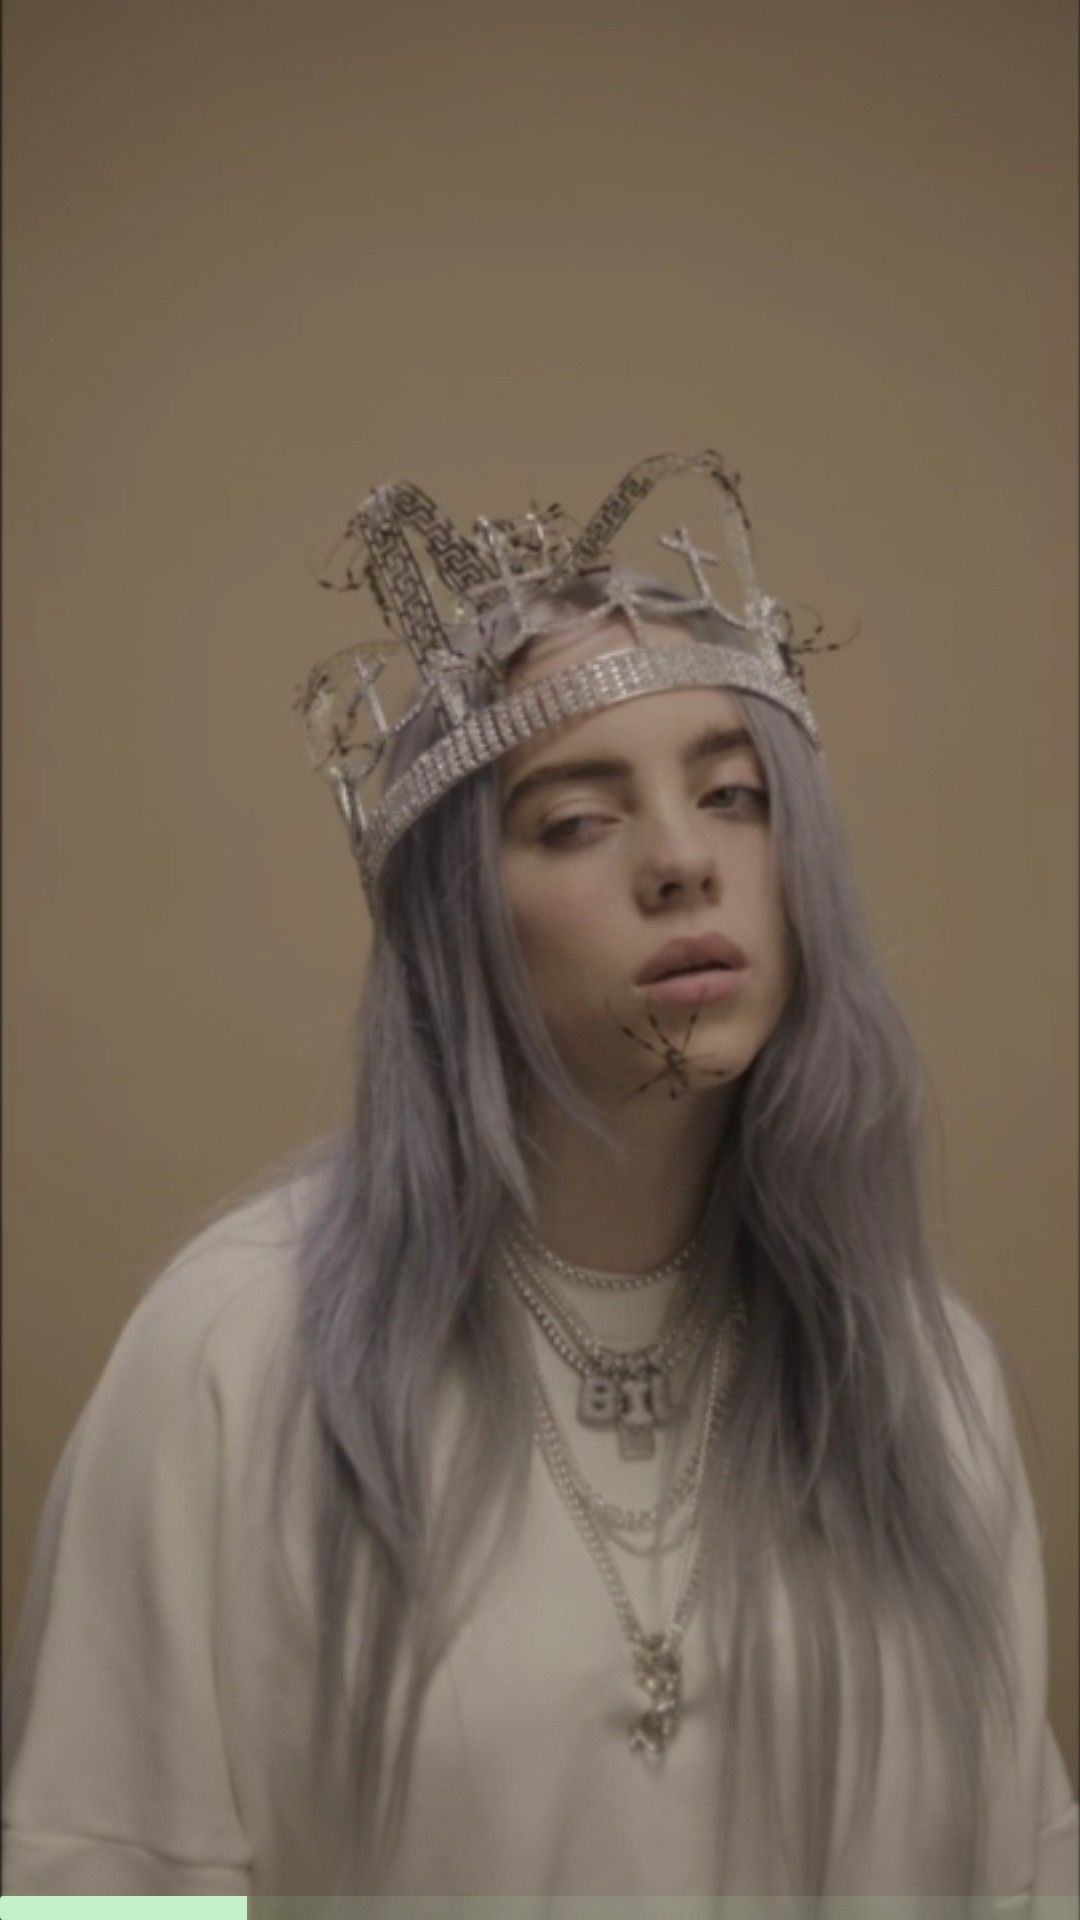 21 Billie Eilish You Should See Me In A Crown Wallpapers Wallpaper On Wallpapersafari